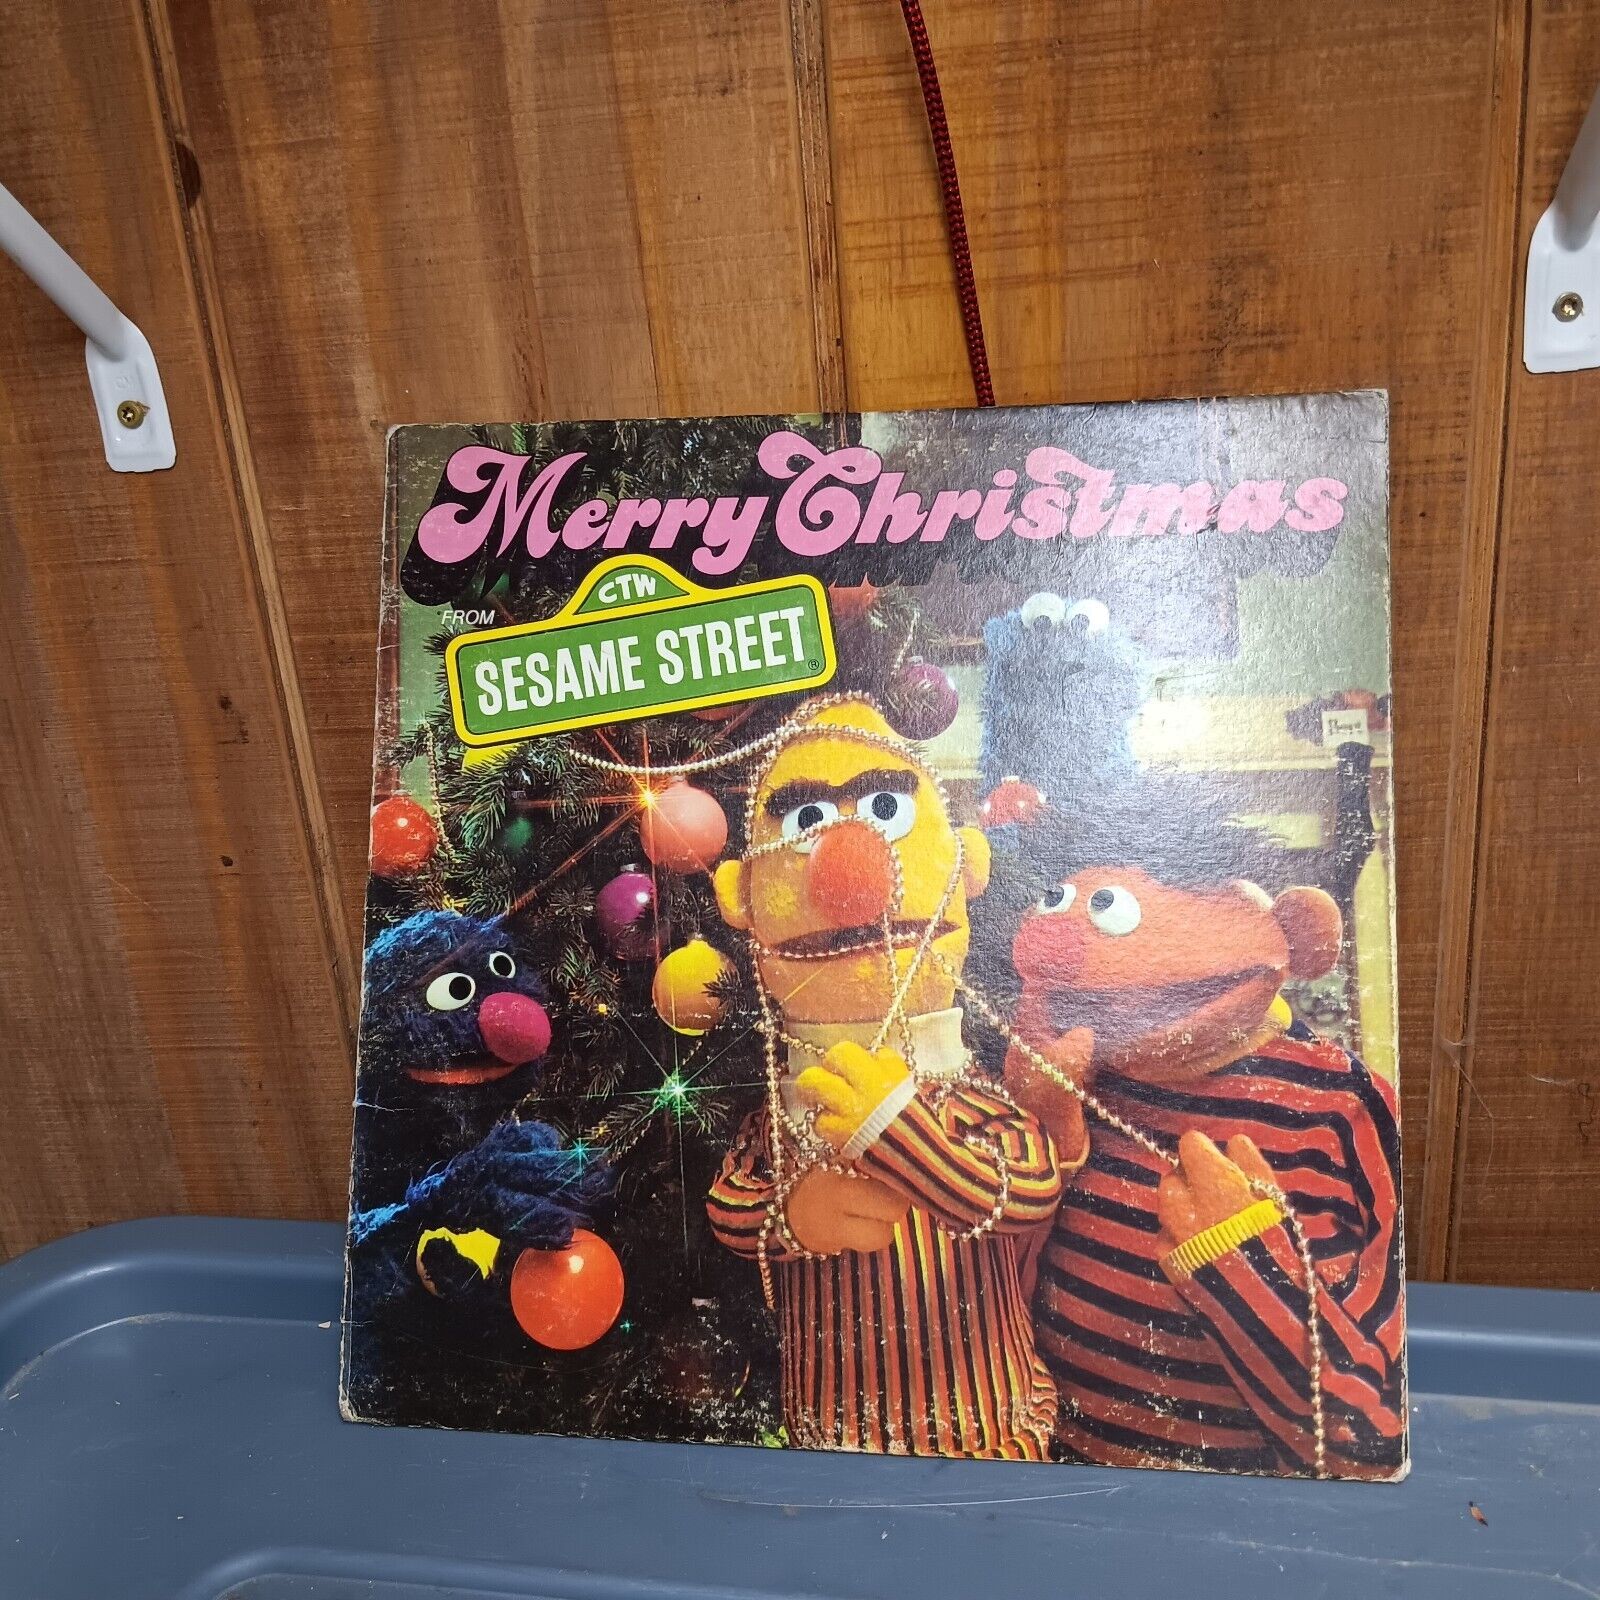 Merry Christmas from Sesame Street 1975 CTW 25516 LP Record